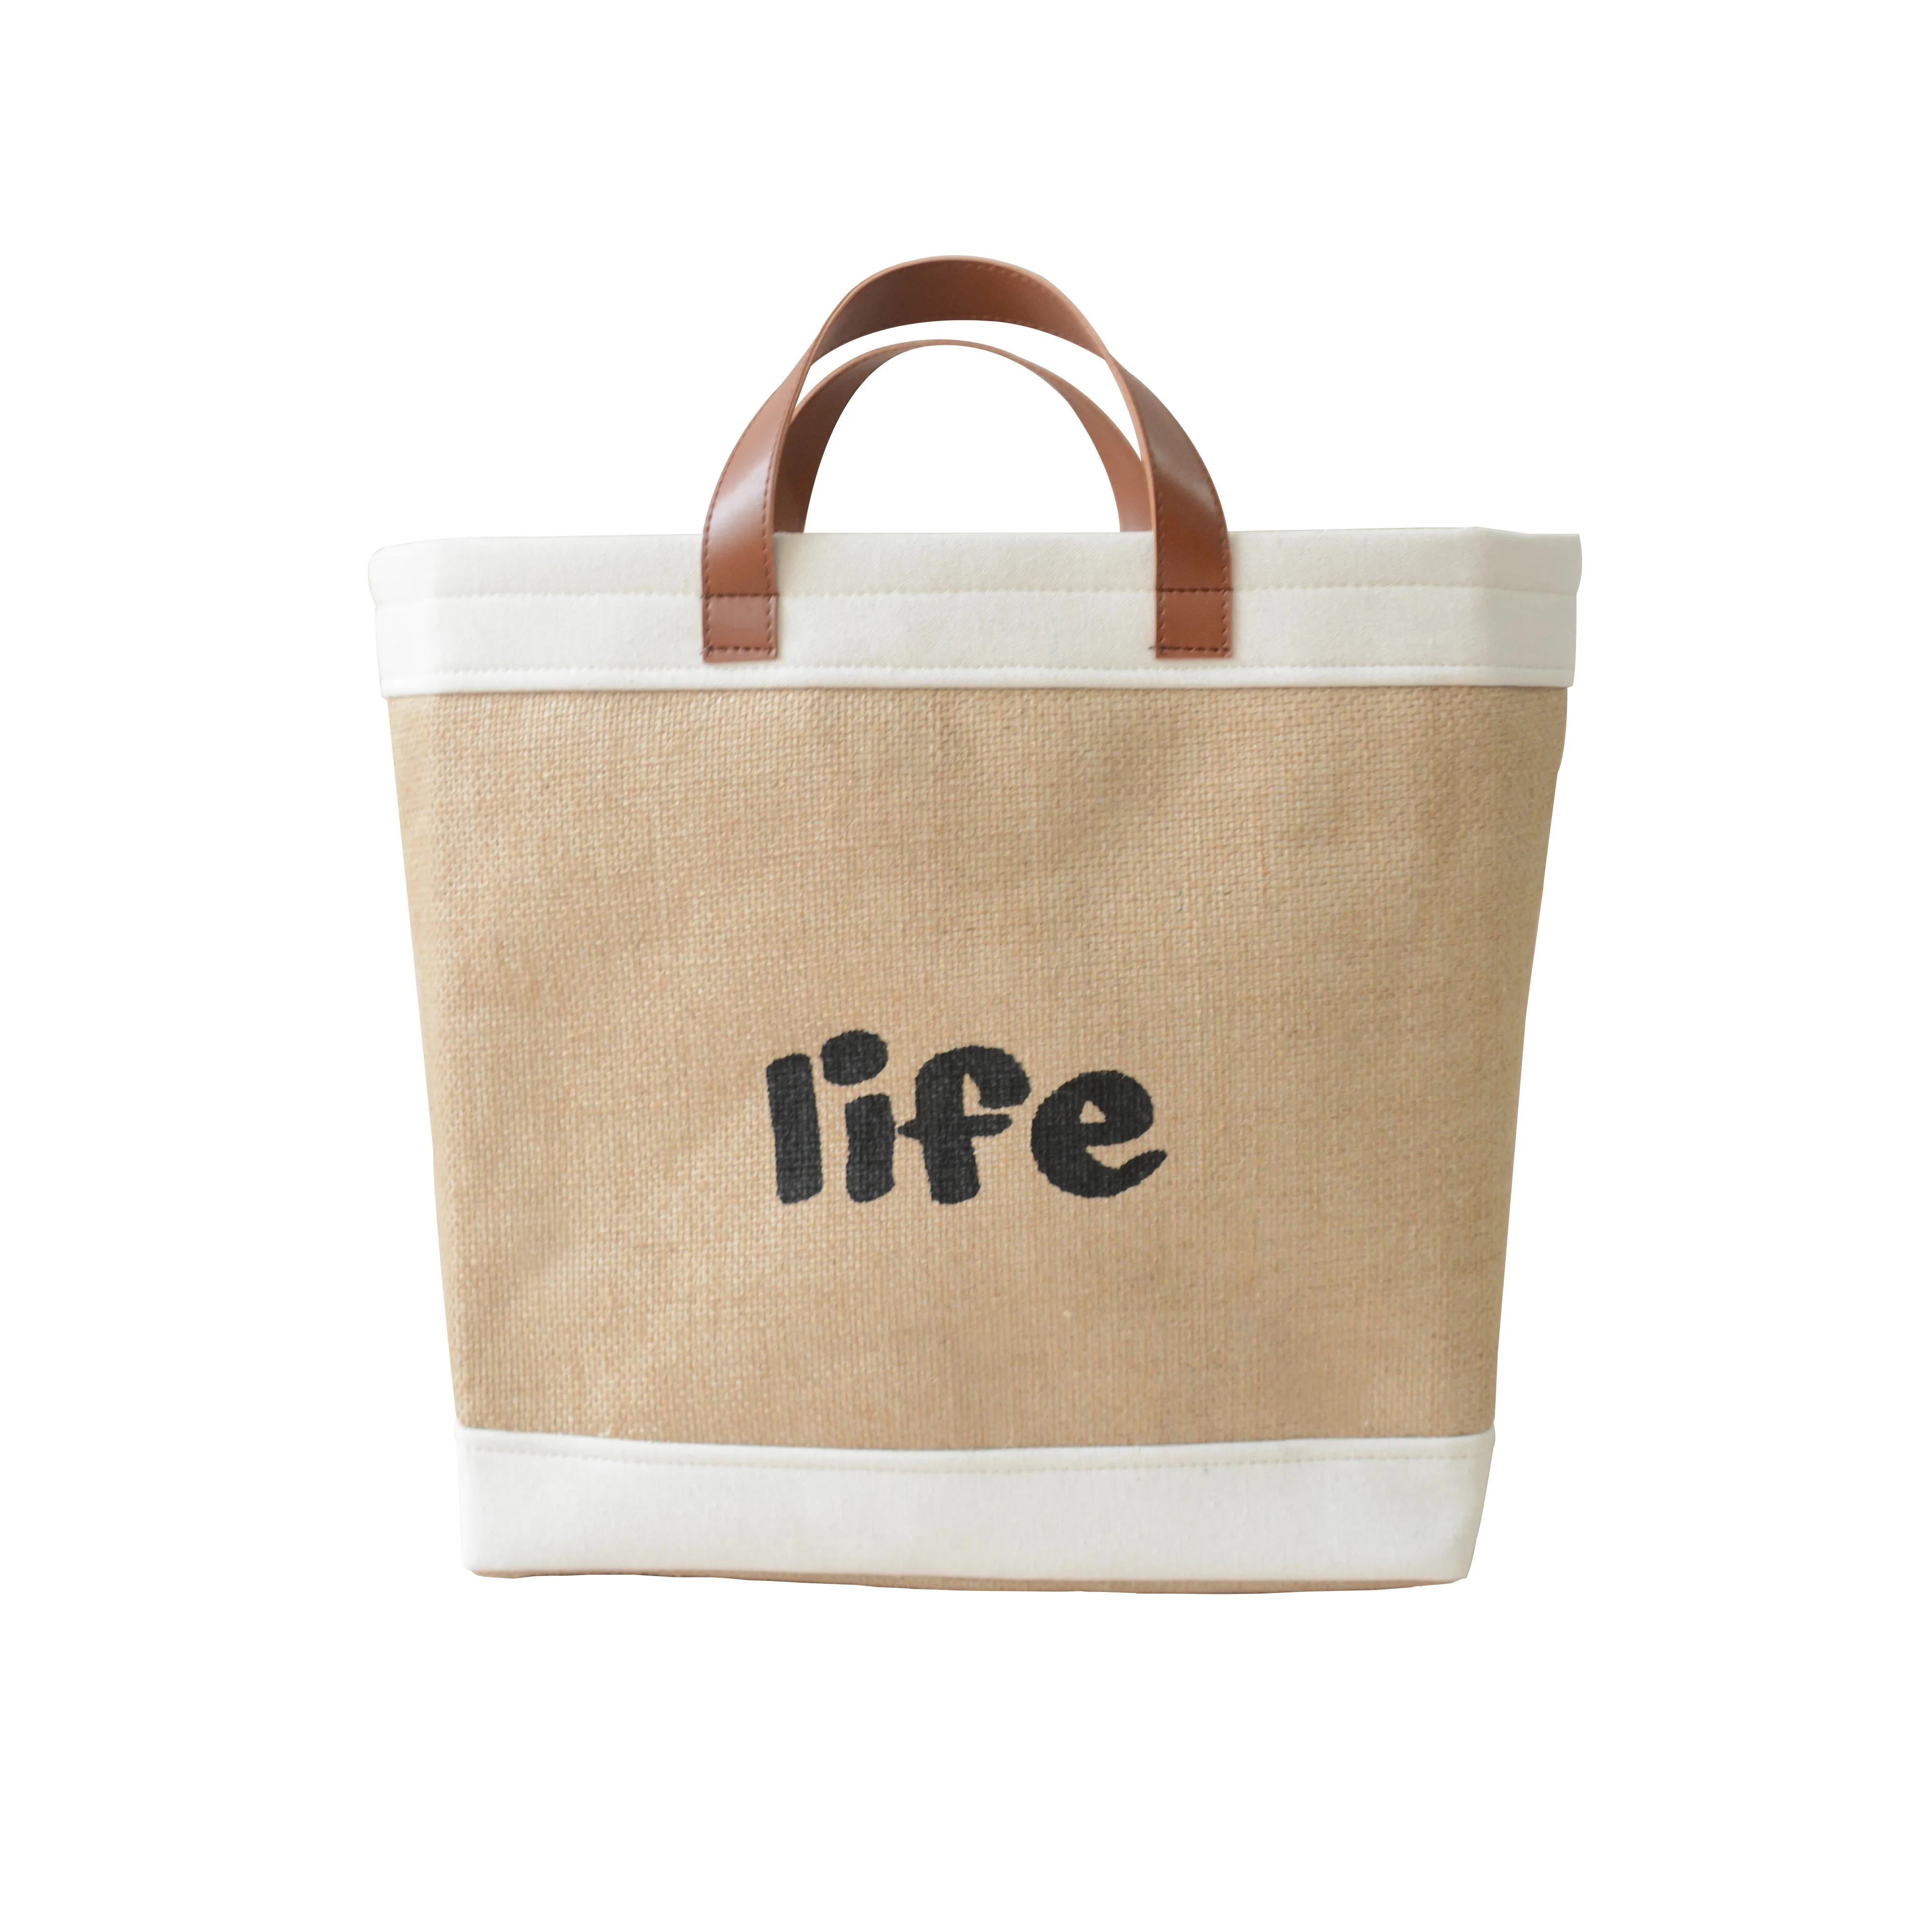 

Custom Design Reusable Grocery Bag Shopping Tote Cotton Jute Burlap with Leather Handle Jute Tote Bags, Can be customized